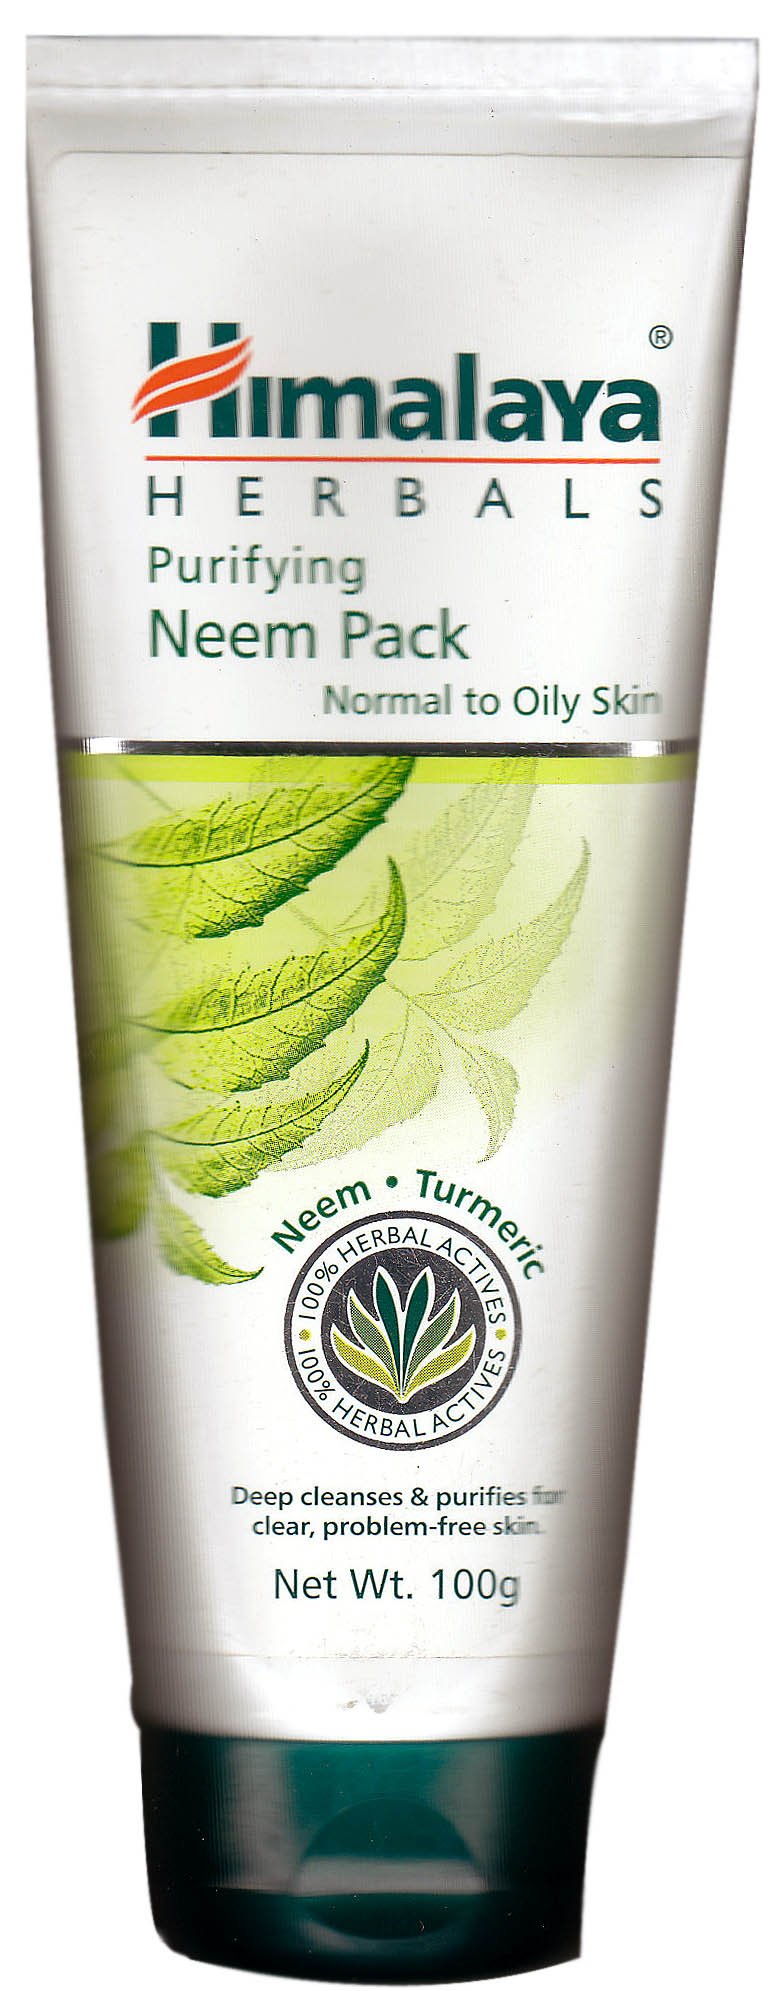 Purifying Neem Pack: (Normal to Oily Skin) - book cover